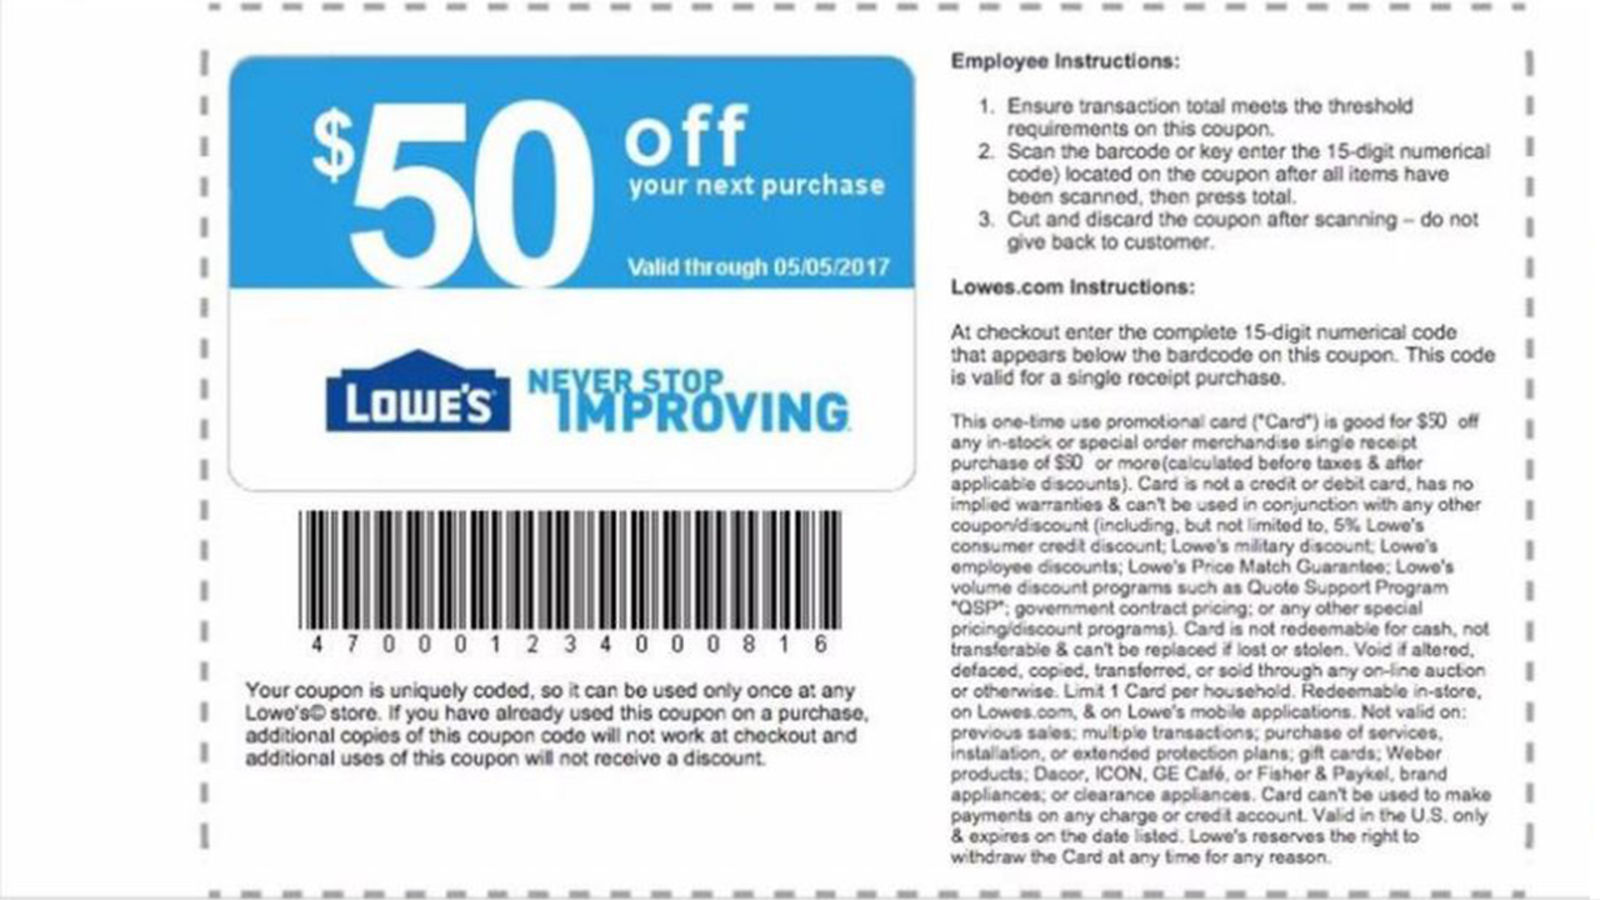 Instabilities in the use of the lowes promo code through customer purchases